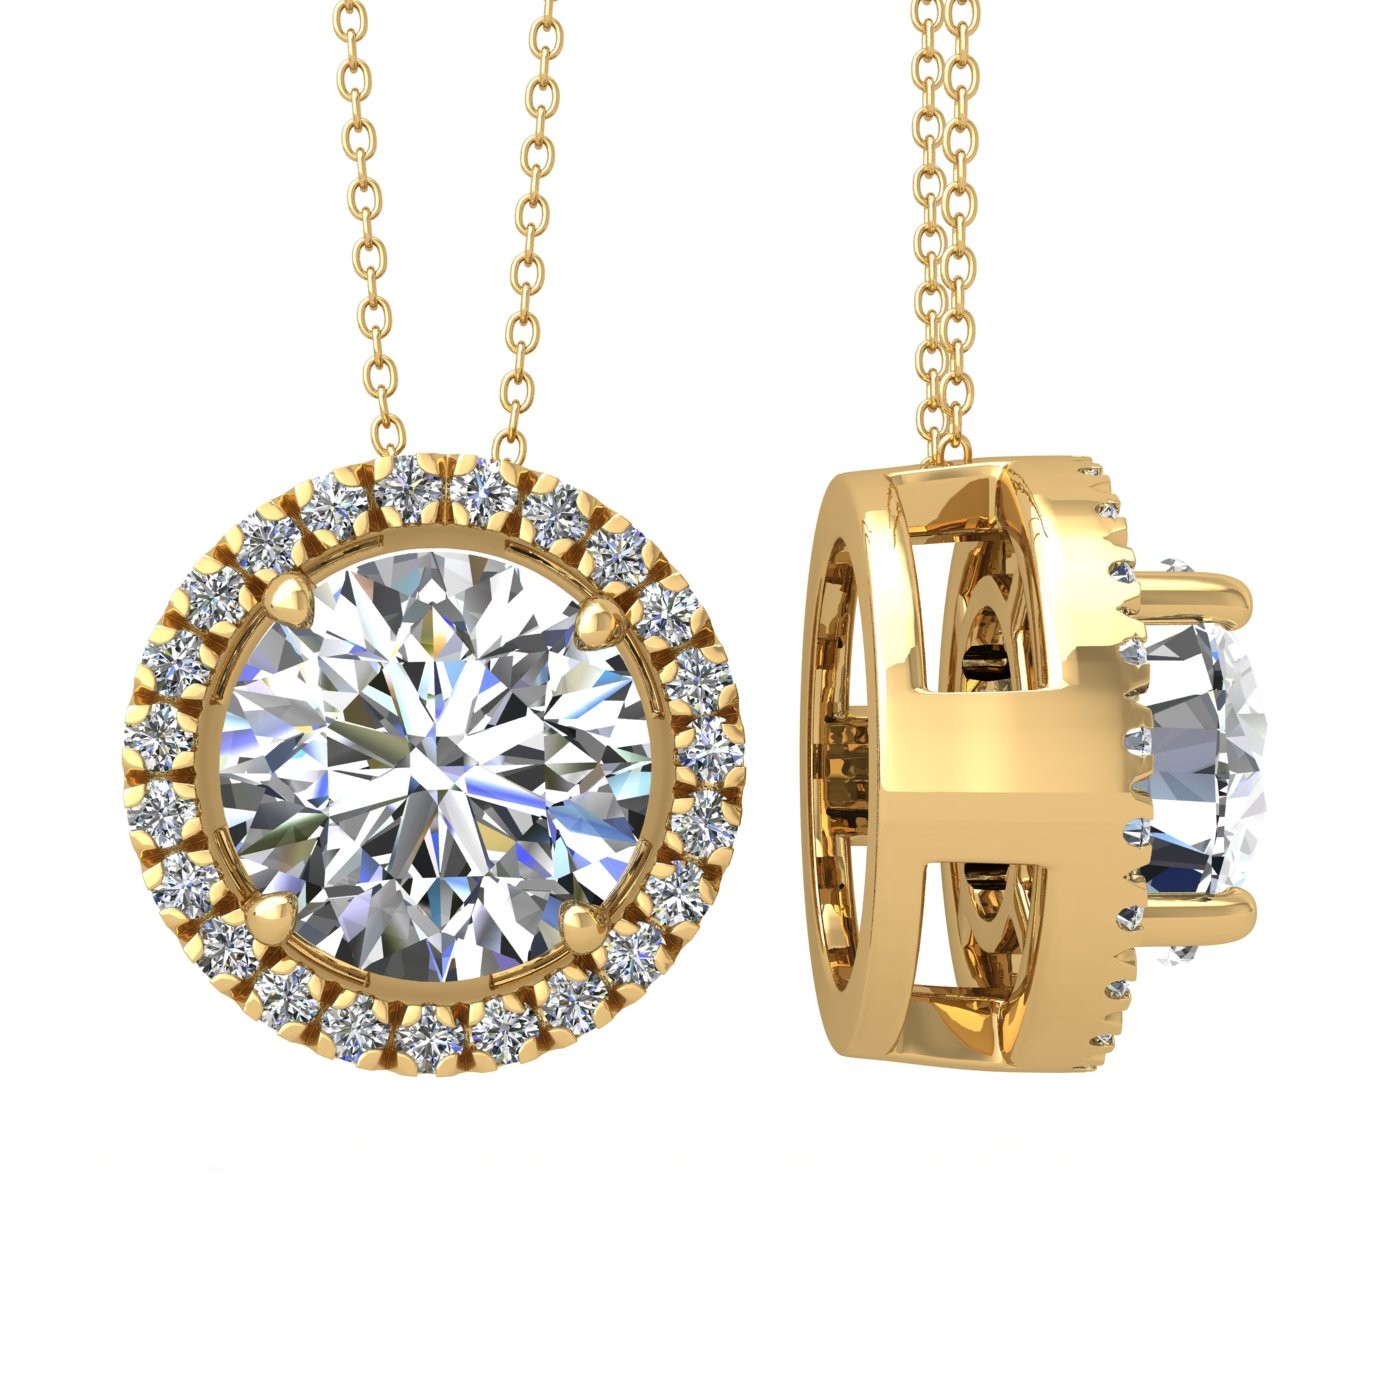 18k yellow gold 2 ct 4 prong round shape diamond pendant with diamond pavÉ set halo including chain seperate from the pendant